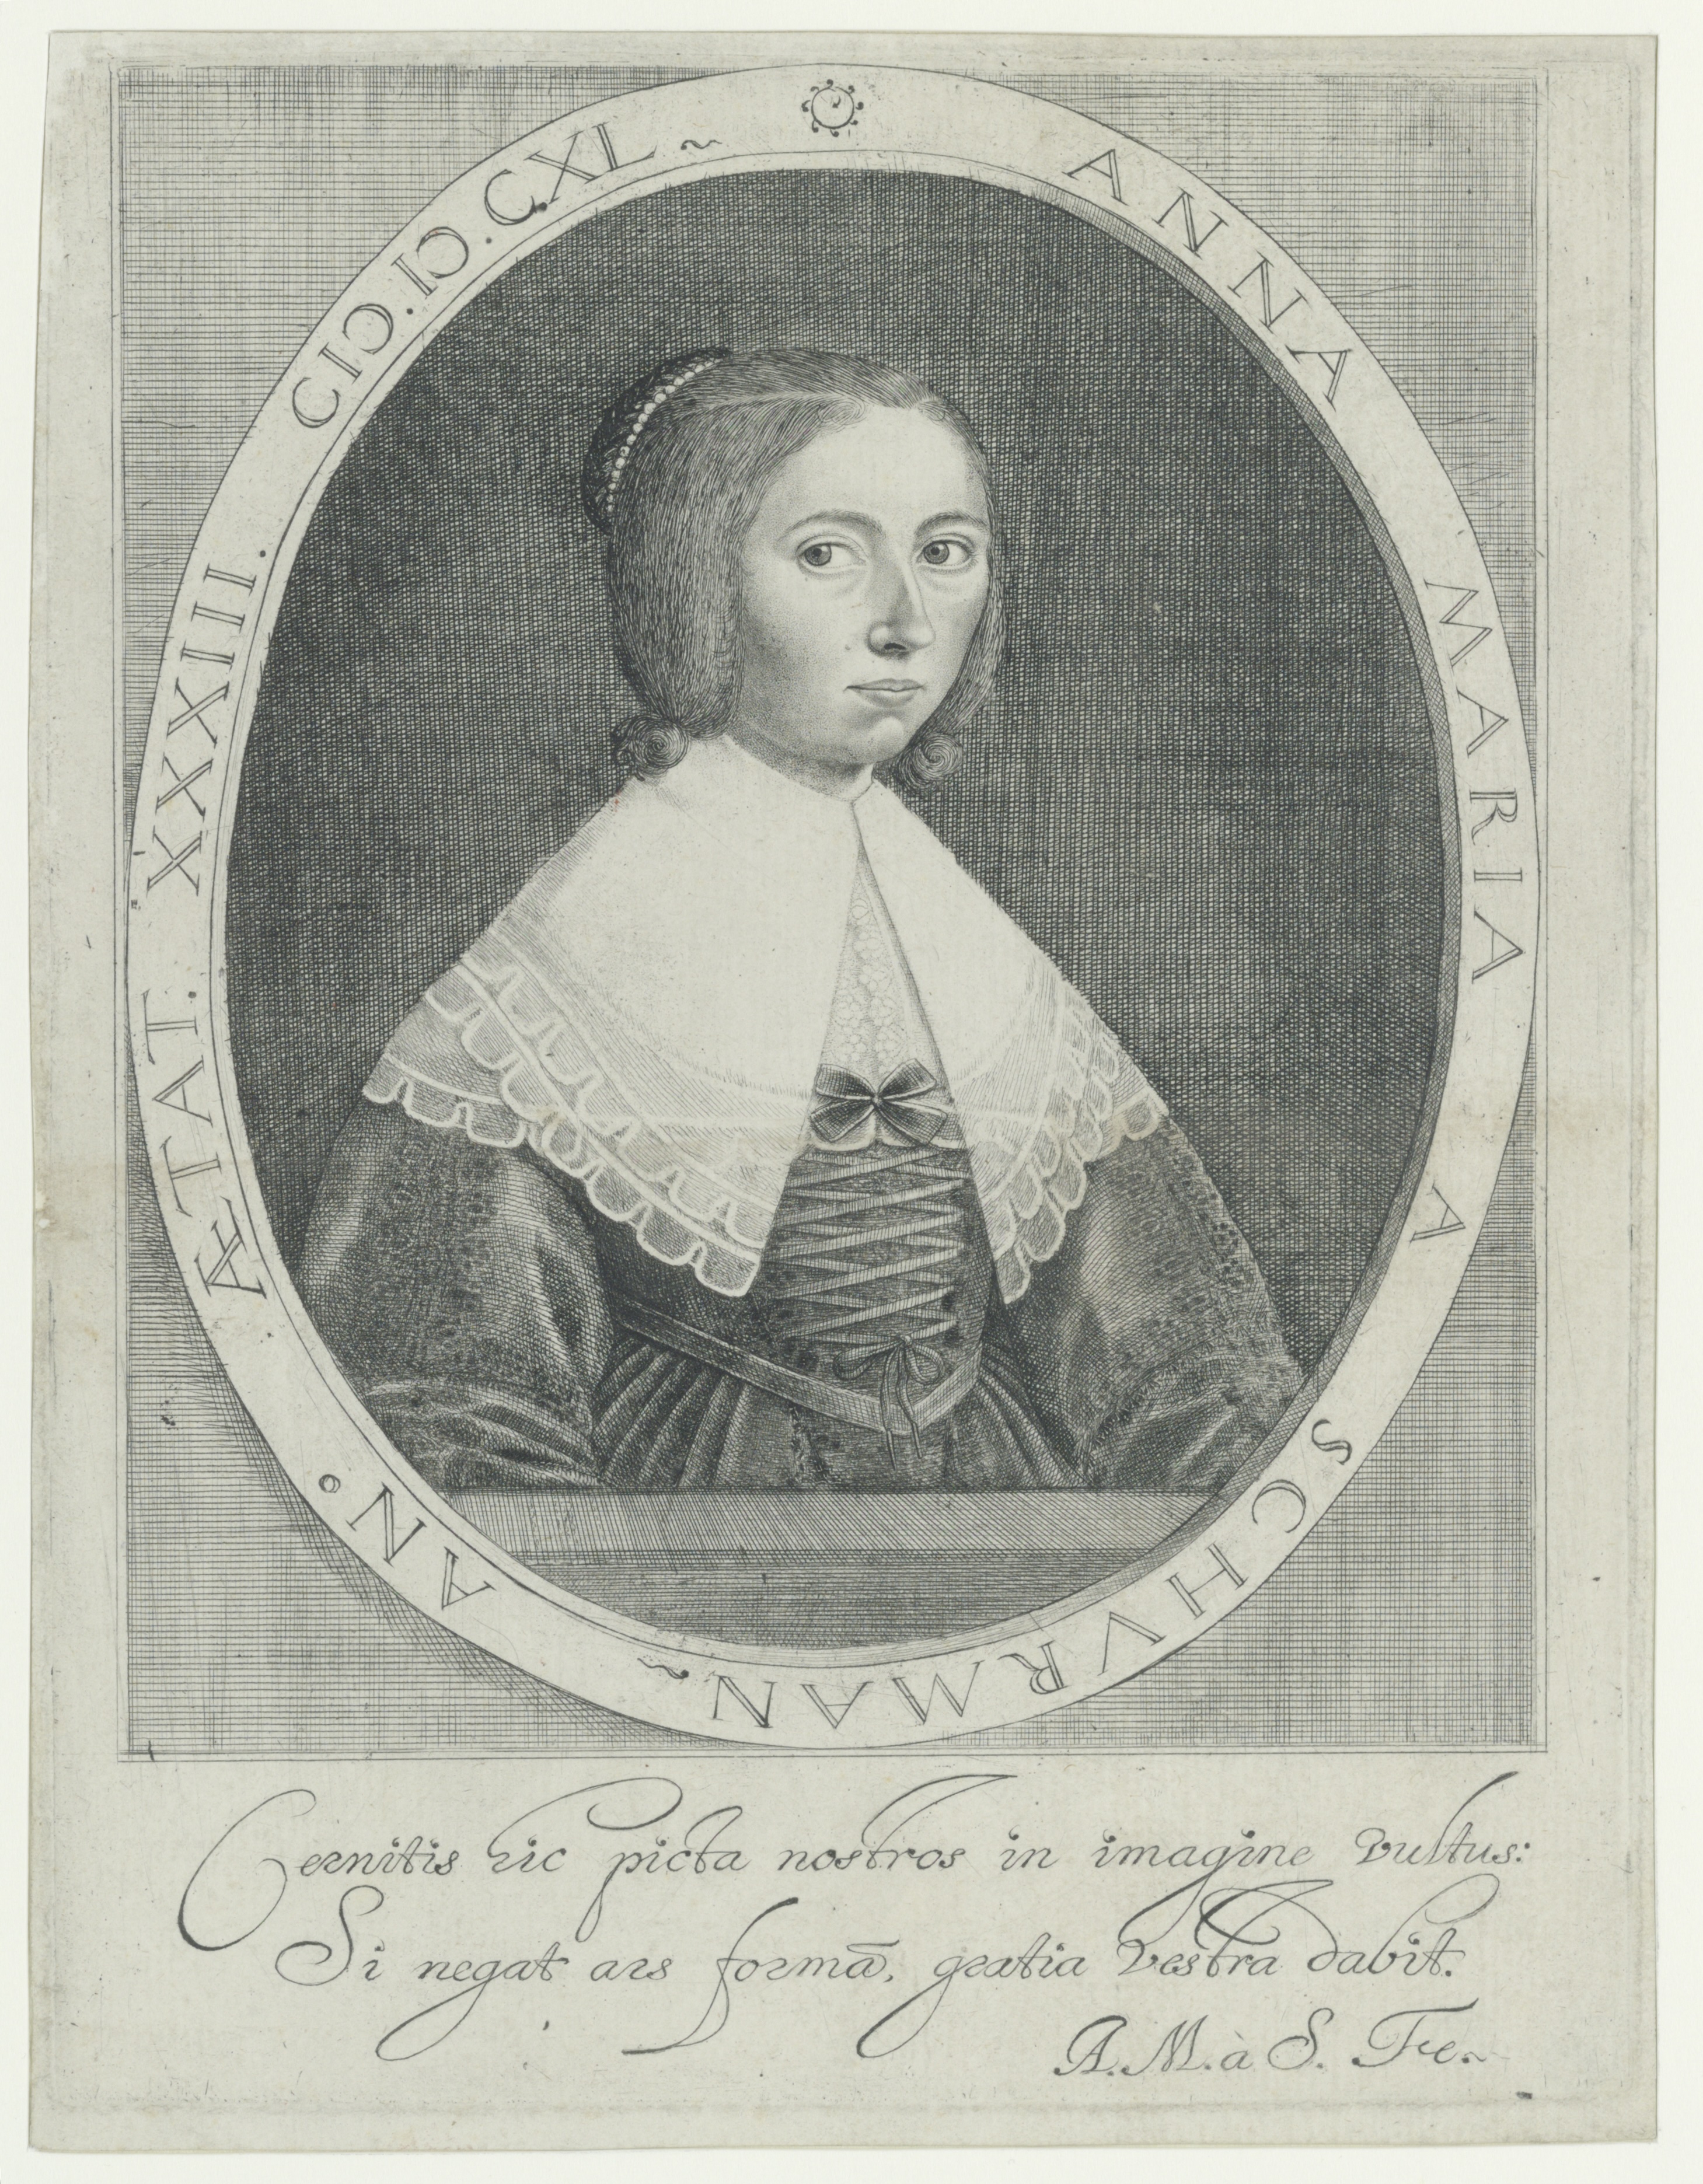 A printed, oval bust-length self-portrait of the artist wearing seventeenth-century clothes, including an oversized, lace-trimmed collar. Her hair is pulled back and tied into a bun, embellished with beads. She looks out directly at the viewer with a neutral expression. She is identified by an inscription around the oval and another at the bottom of the sheet.